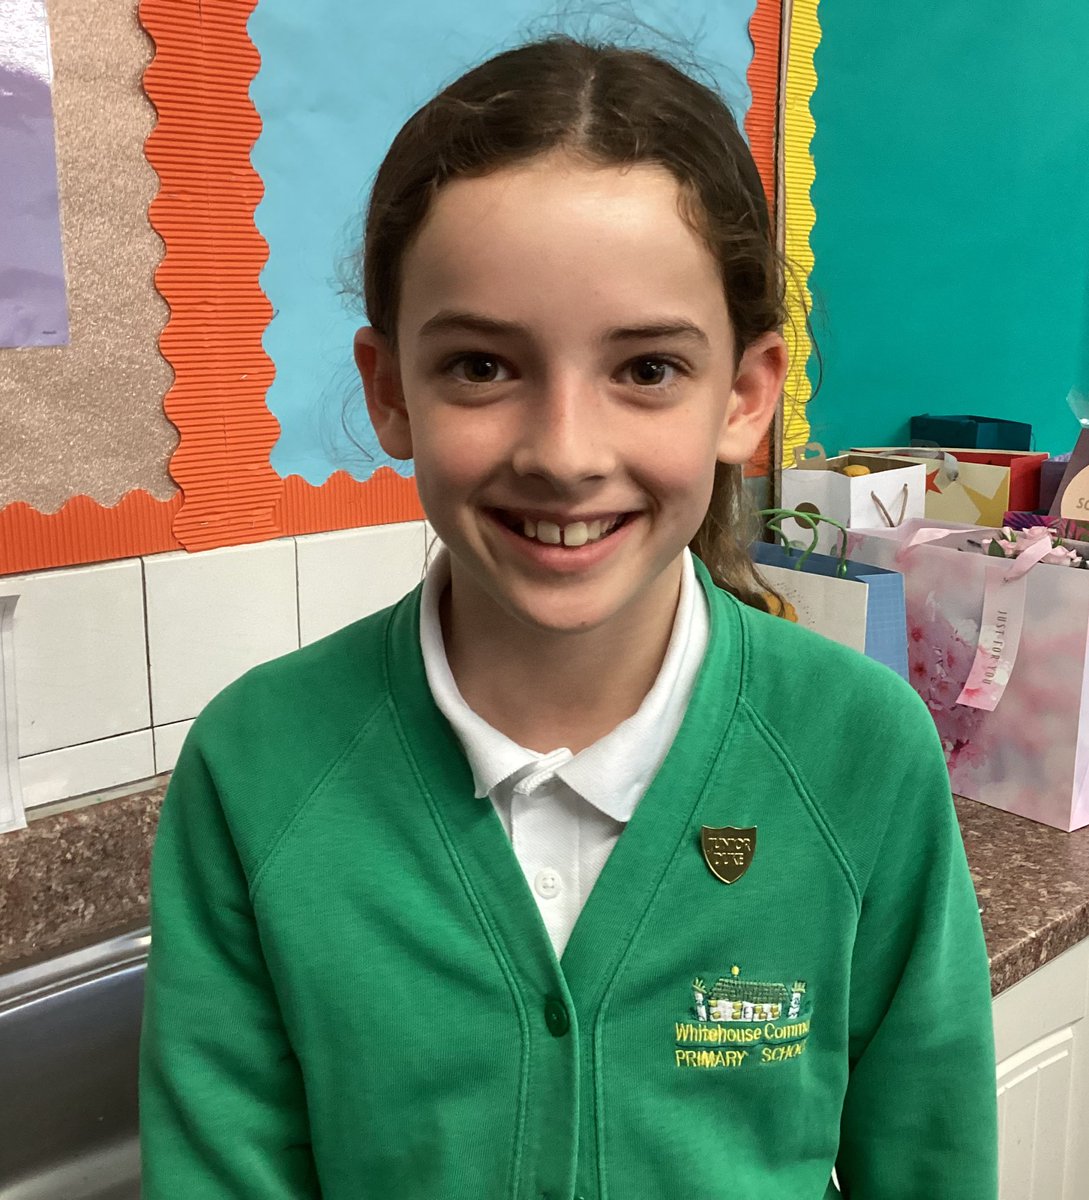 Congratulations to Ellie who has been awarded her GOLD Junior Duke this week! Well done Ellie - a fantastic achievement! #whcjuniorduke #whcyear5 @DukeAwards